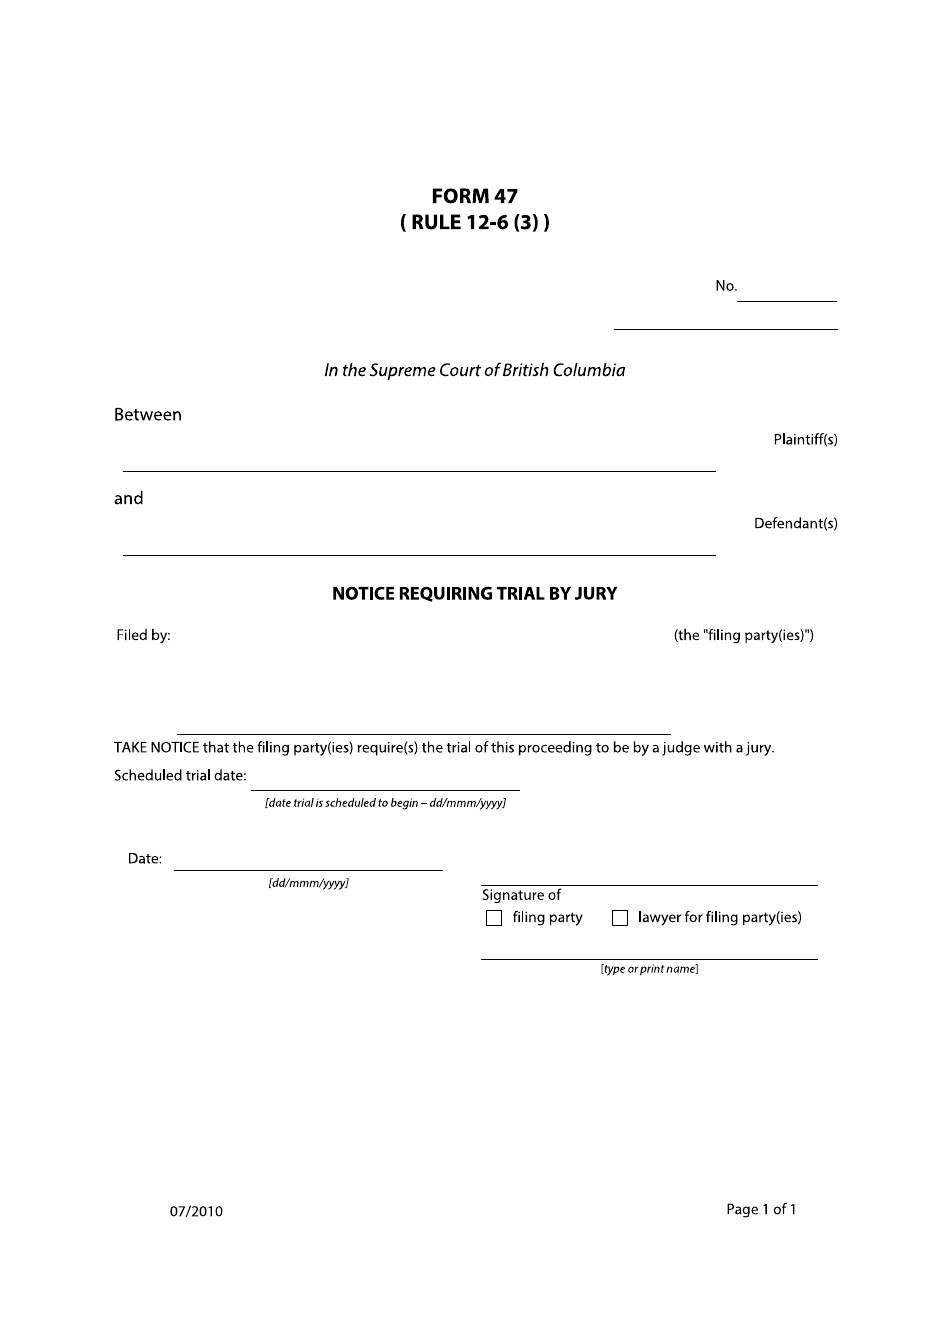 Form 47 Notice Requiring Trial by Jury - British Columbia, Canada, Page 1